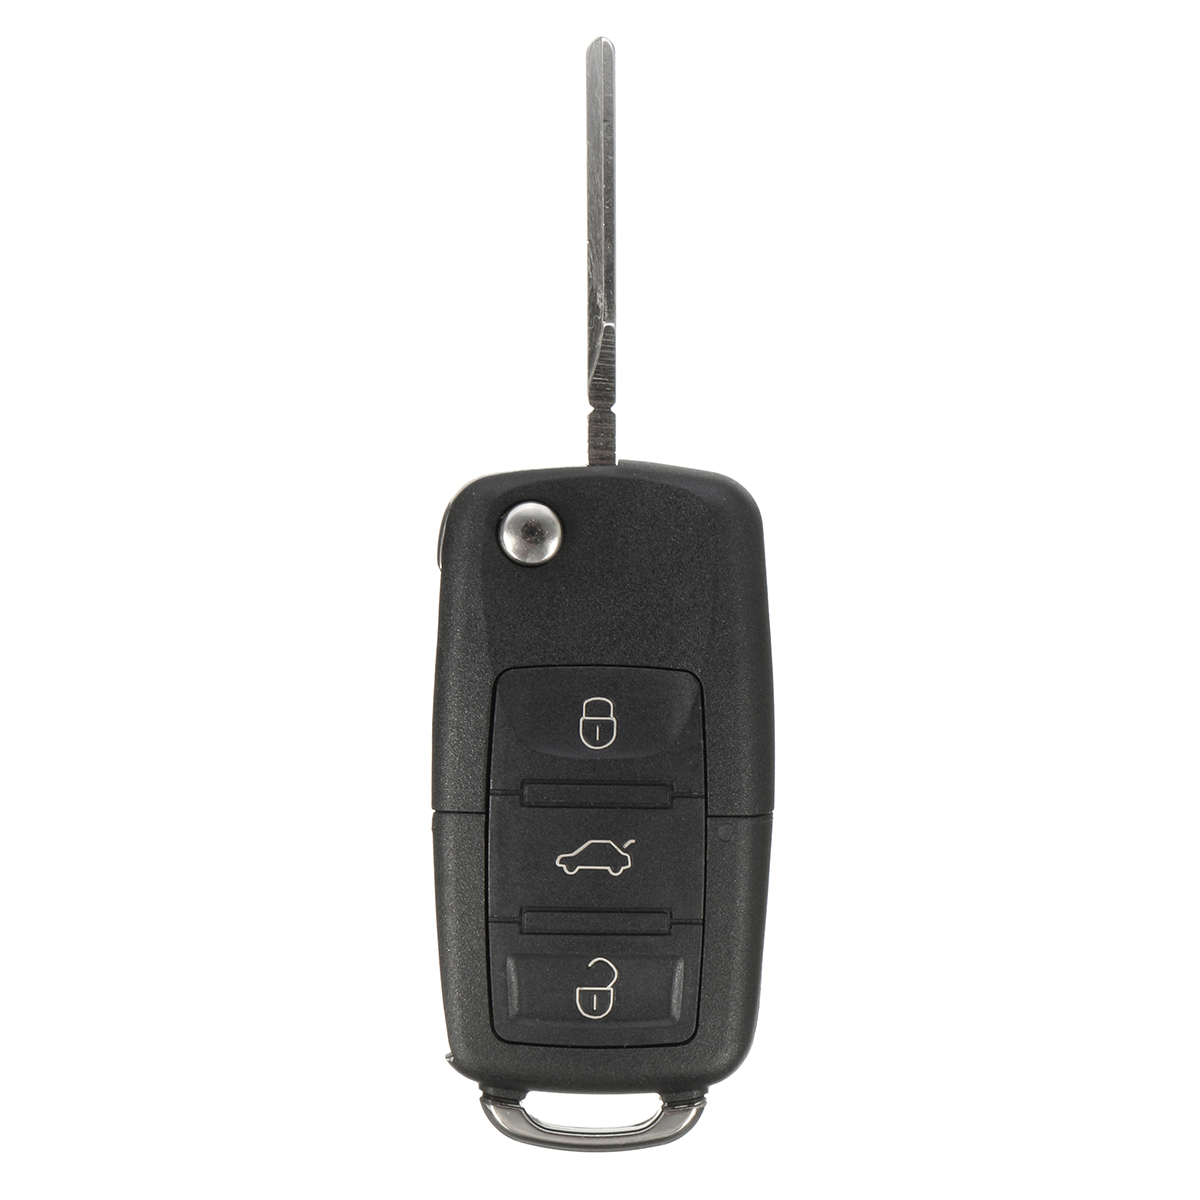 

3 Button Flip Keyless Uncut Key Entry Remote Control Fob ID48 Chip 433MHz For VW